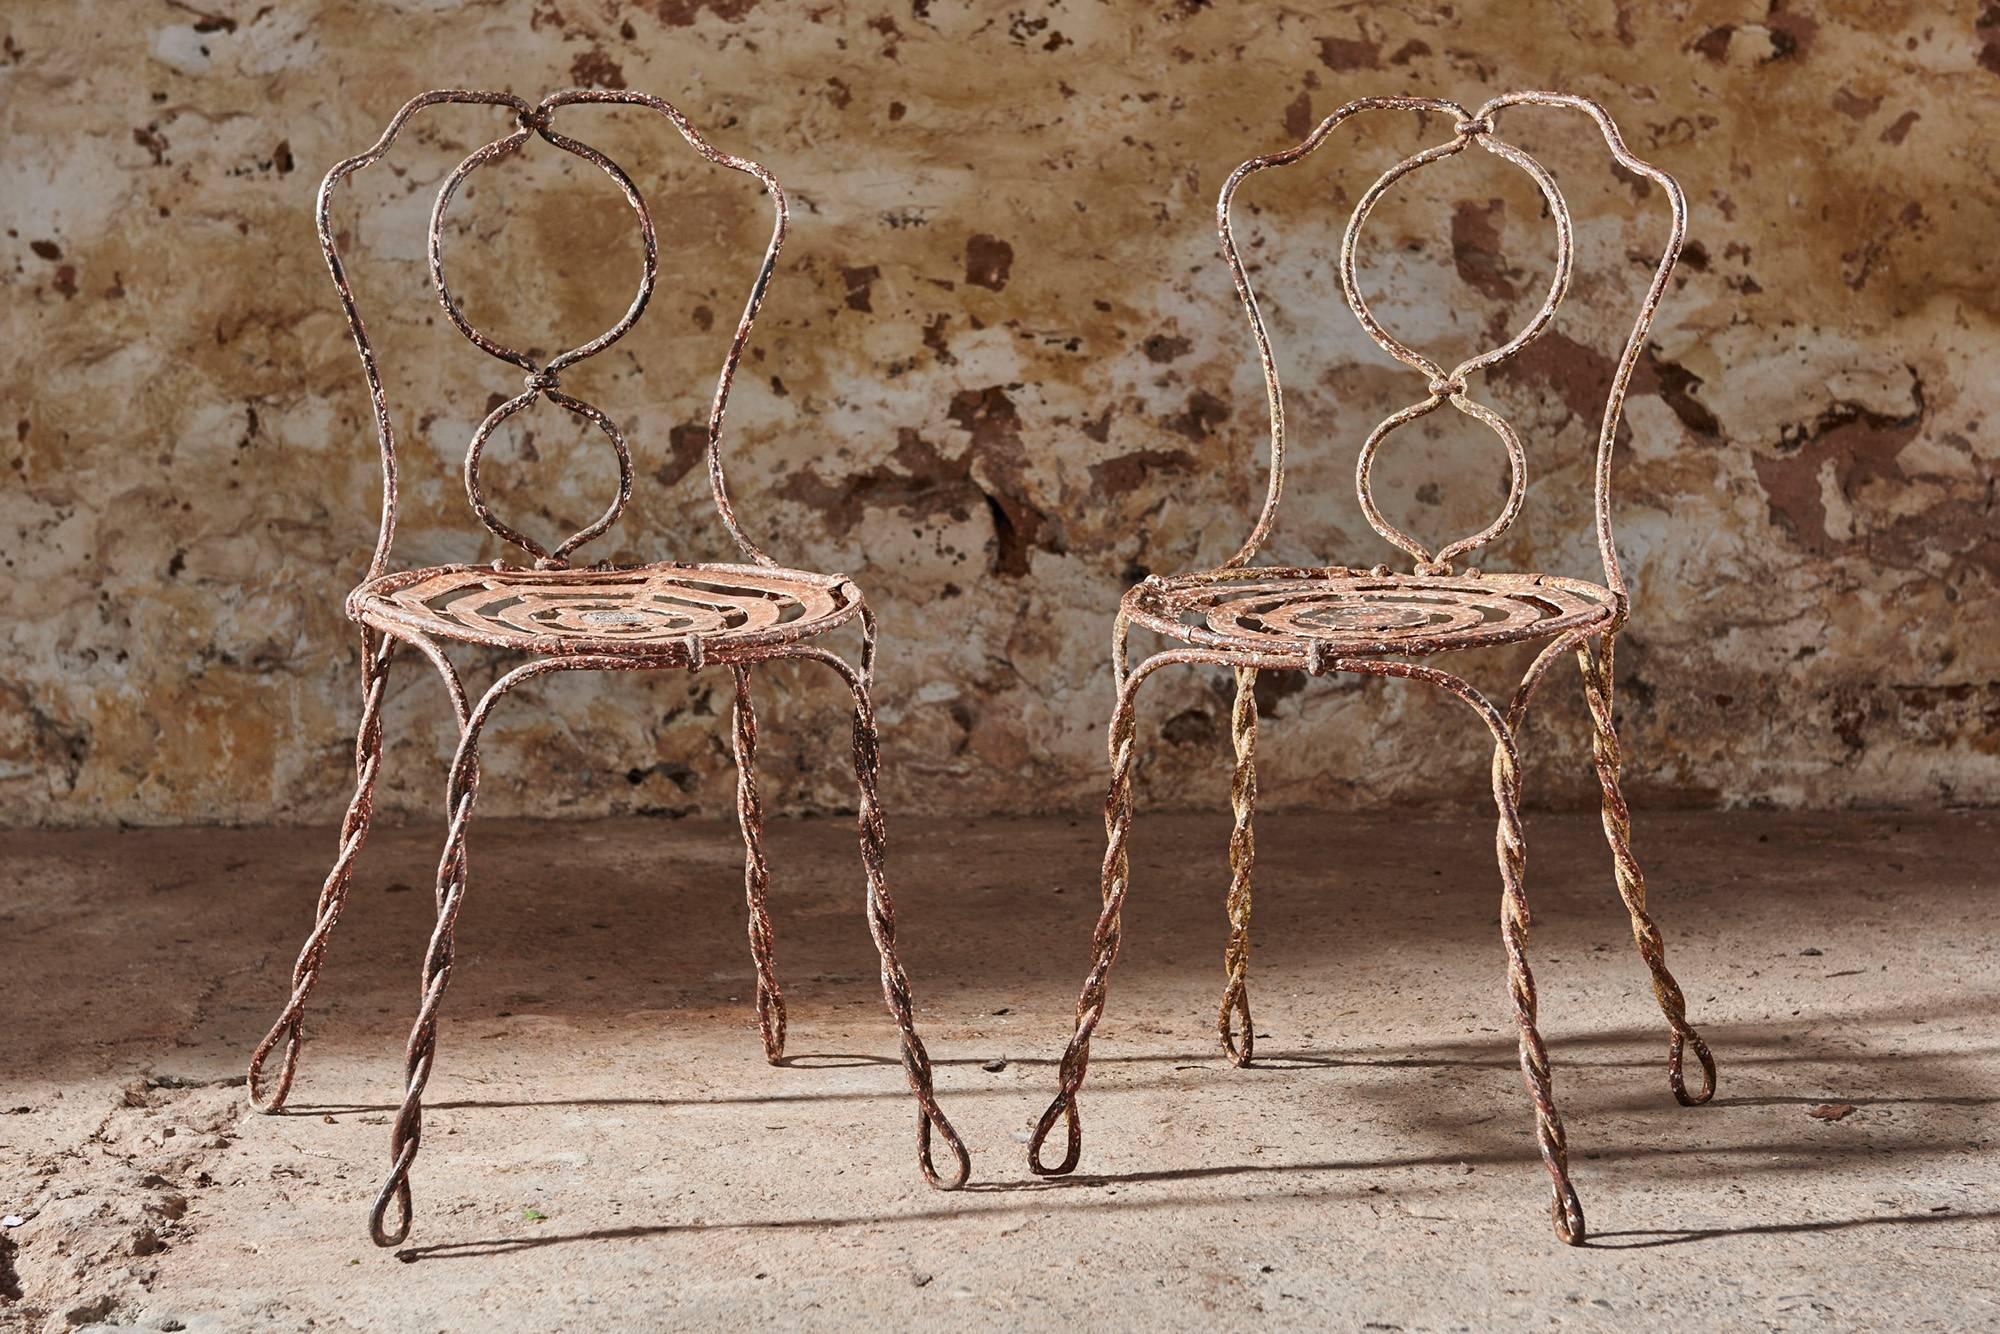 These fantastic and rare Vachon chairs were made in Paris in mid-19th century.
They have a rope style twisted metal frame and a beautiful and original patina. One chair has the manufacturers lead badge in the middle of the seat which is